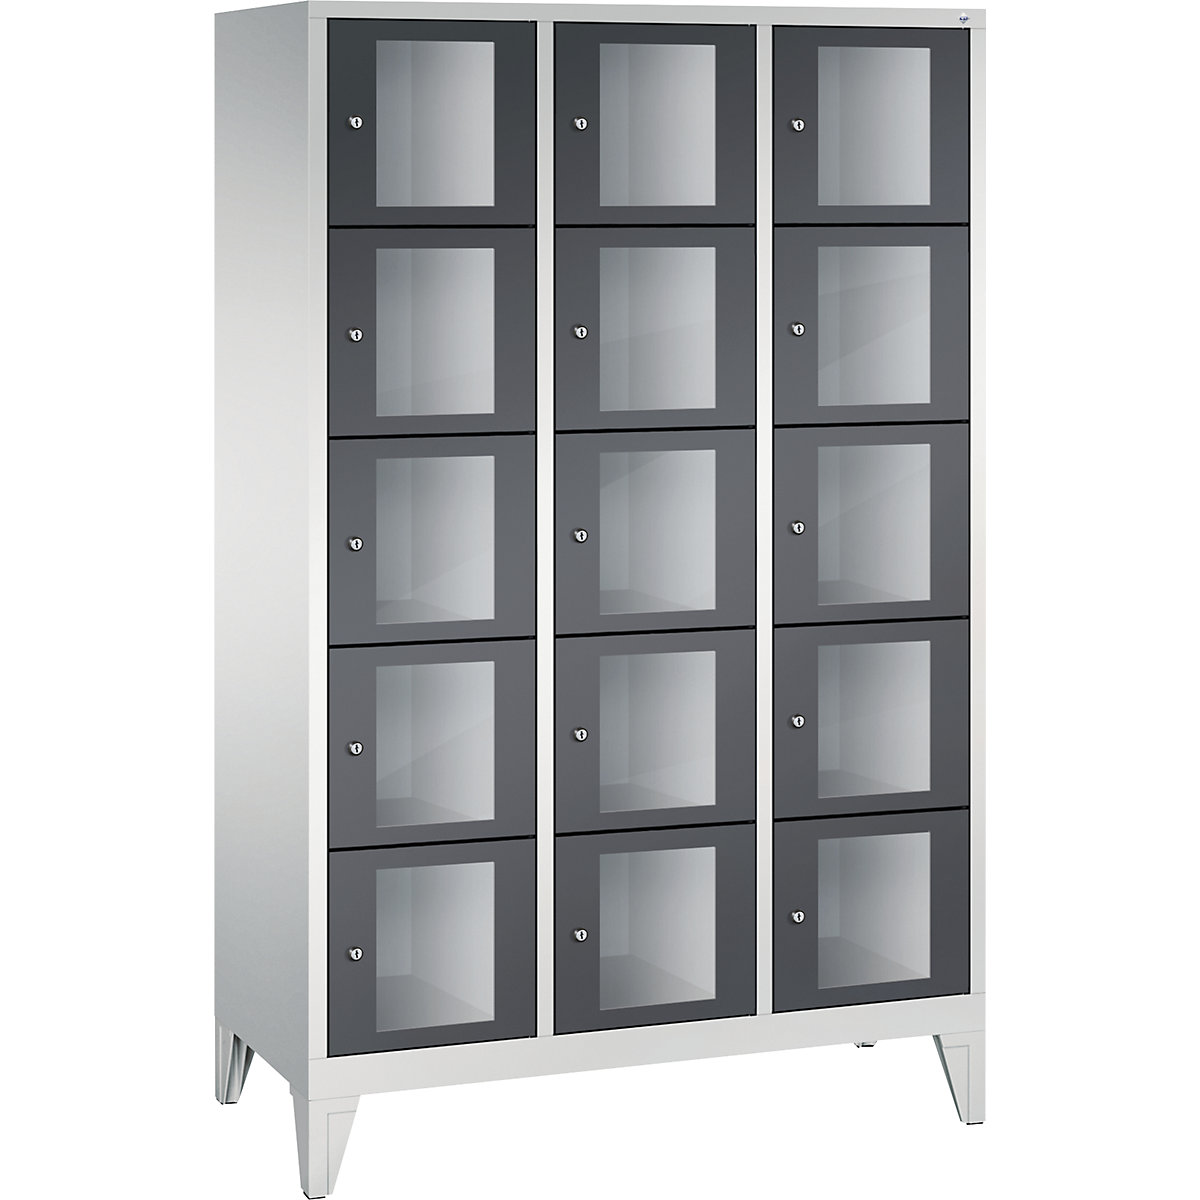 CLASSIC locker unit, compartment height 295 mm, with feet – C+P, 15 compartments, width 1200 mm, black grey door